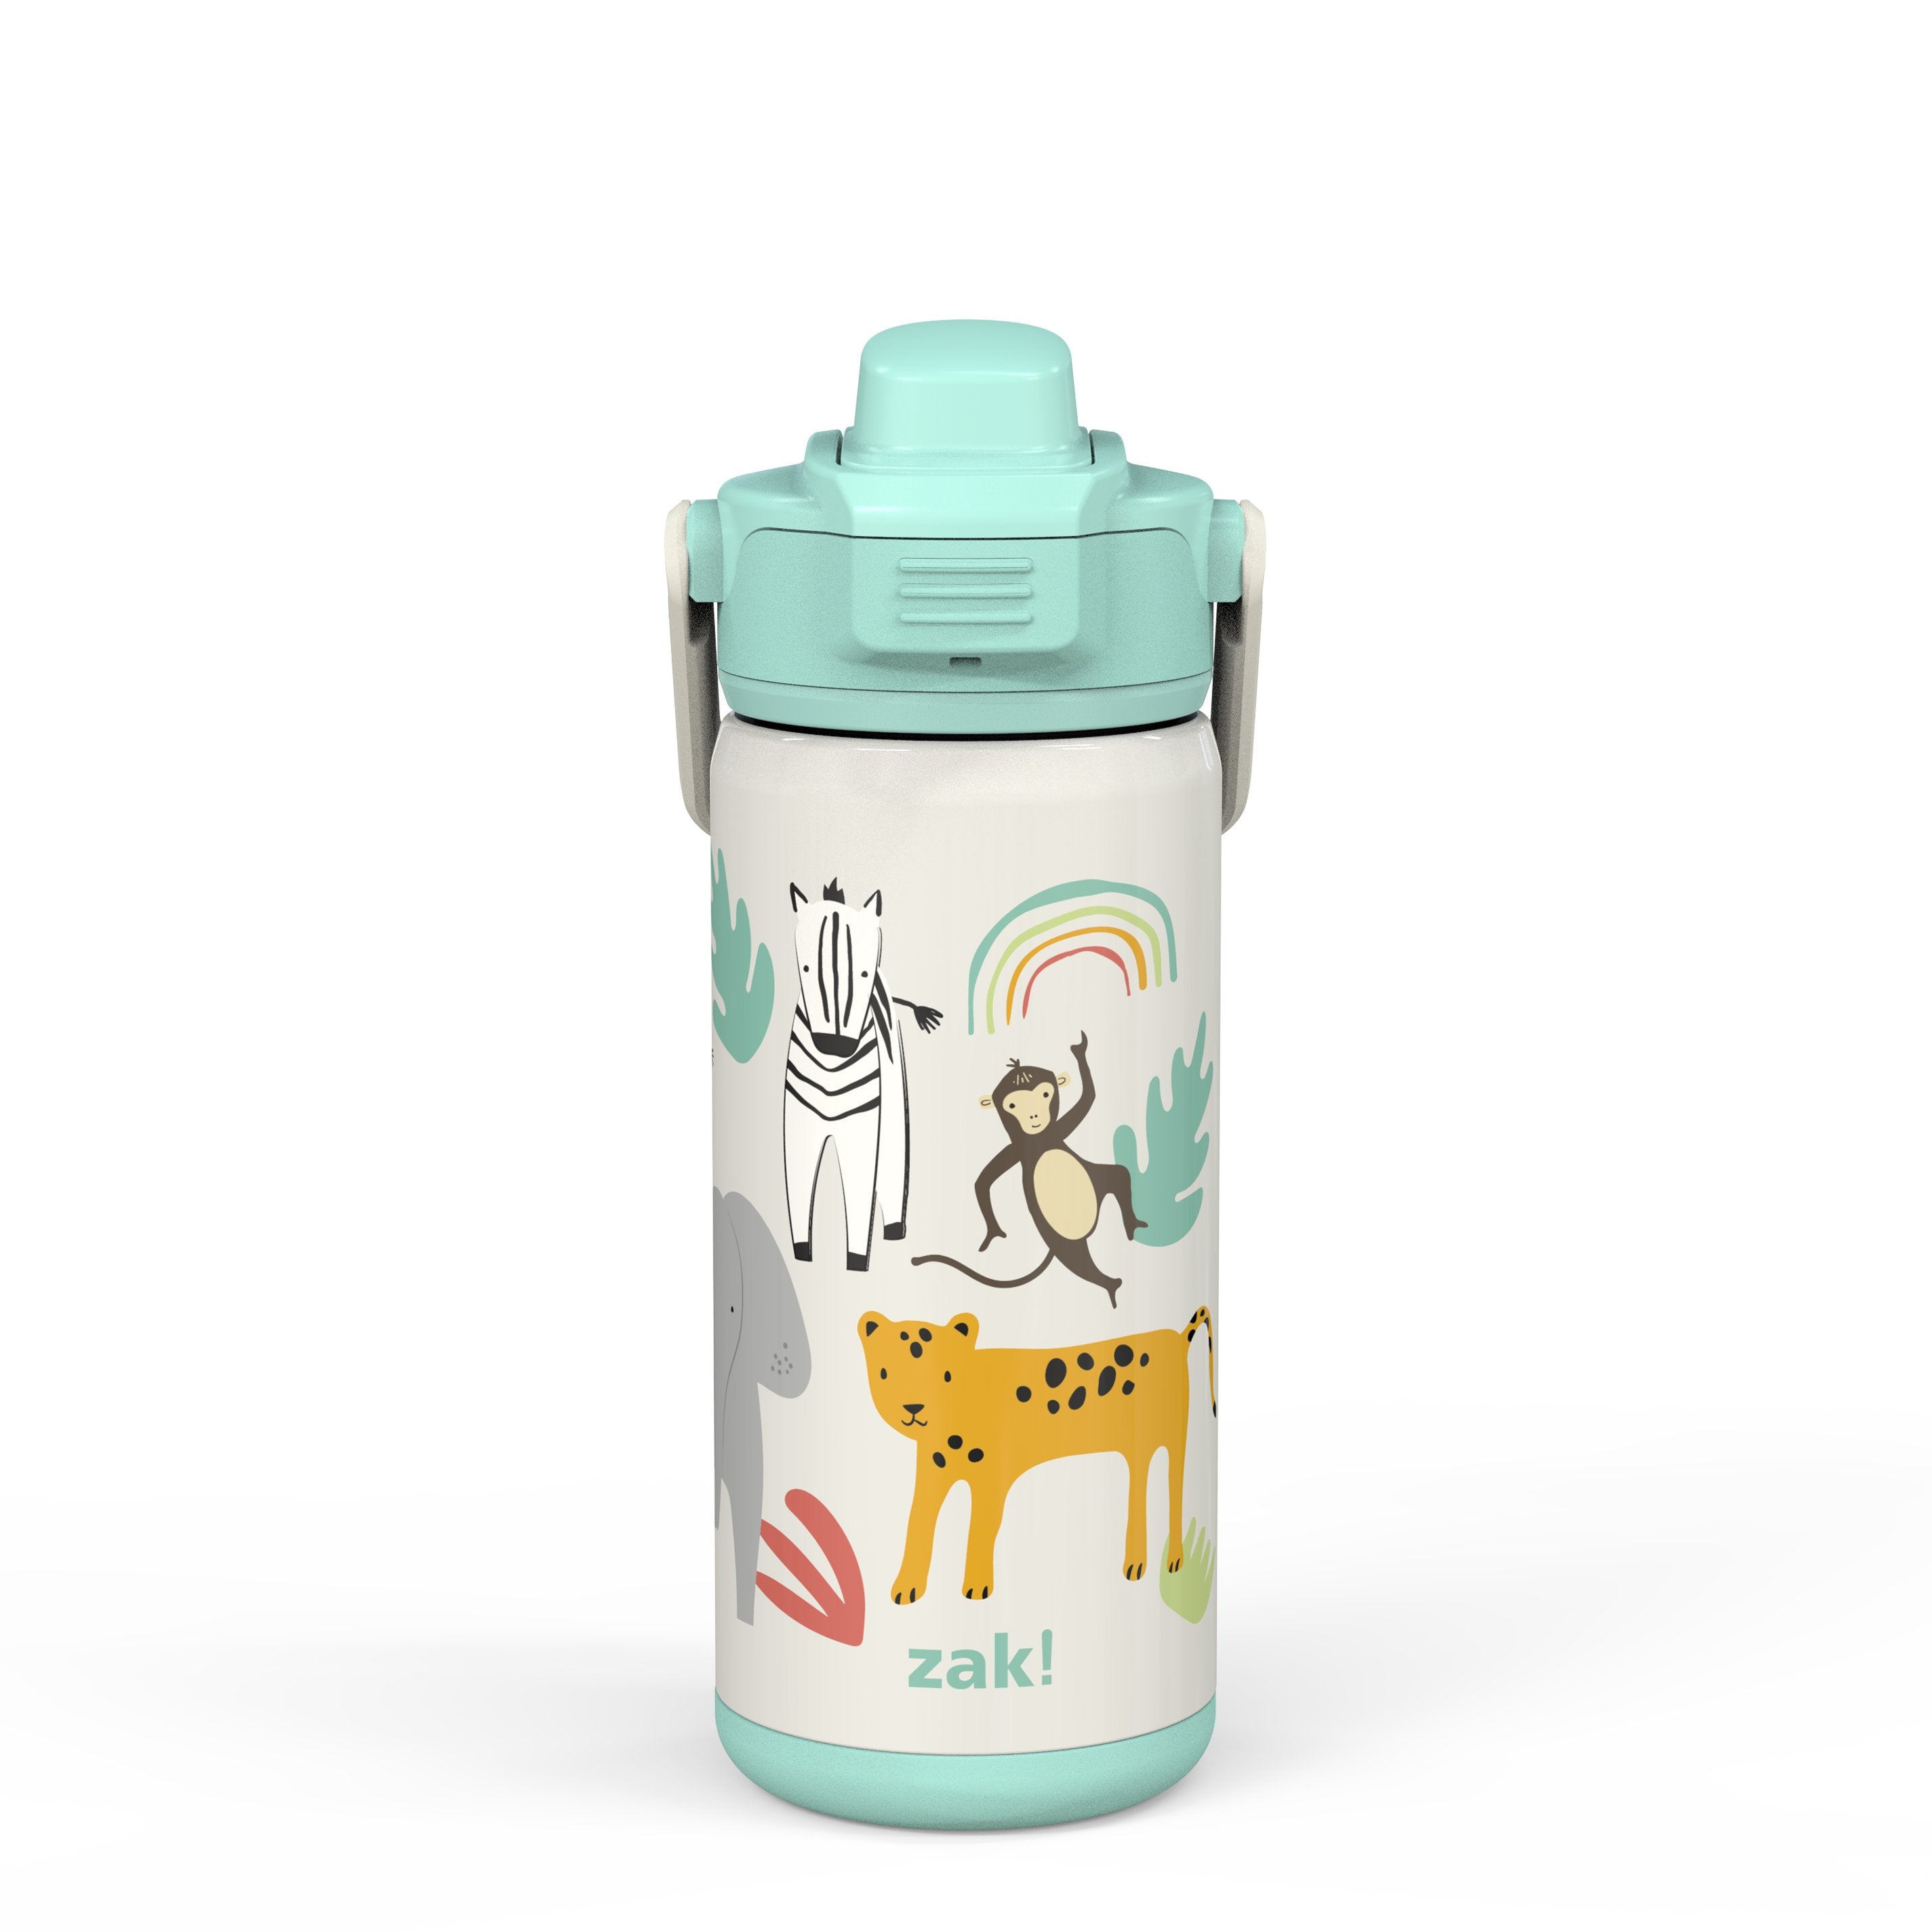 Beacon Stainless Steel Insulated Kids Water Bottle with Covered Spout - Safari, 14 Ounces